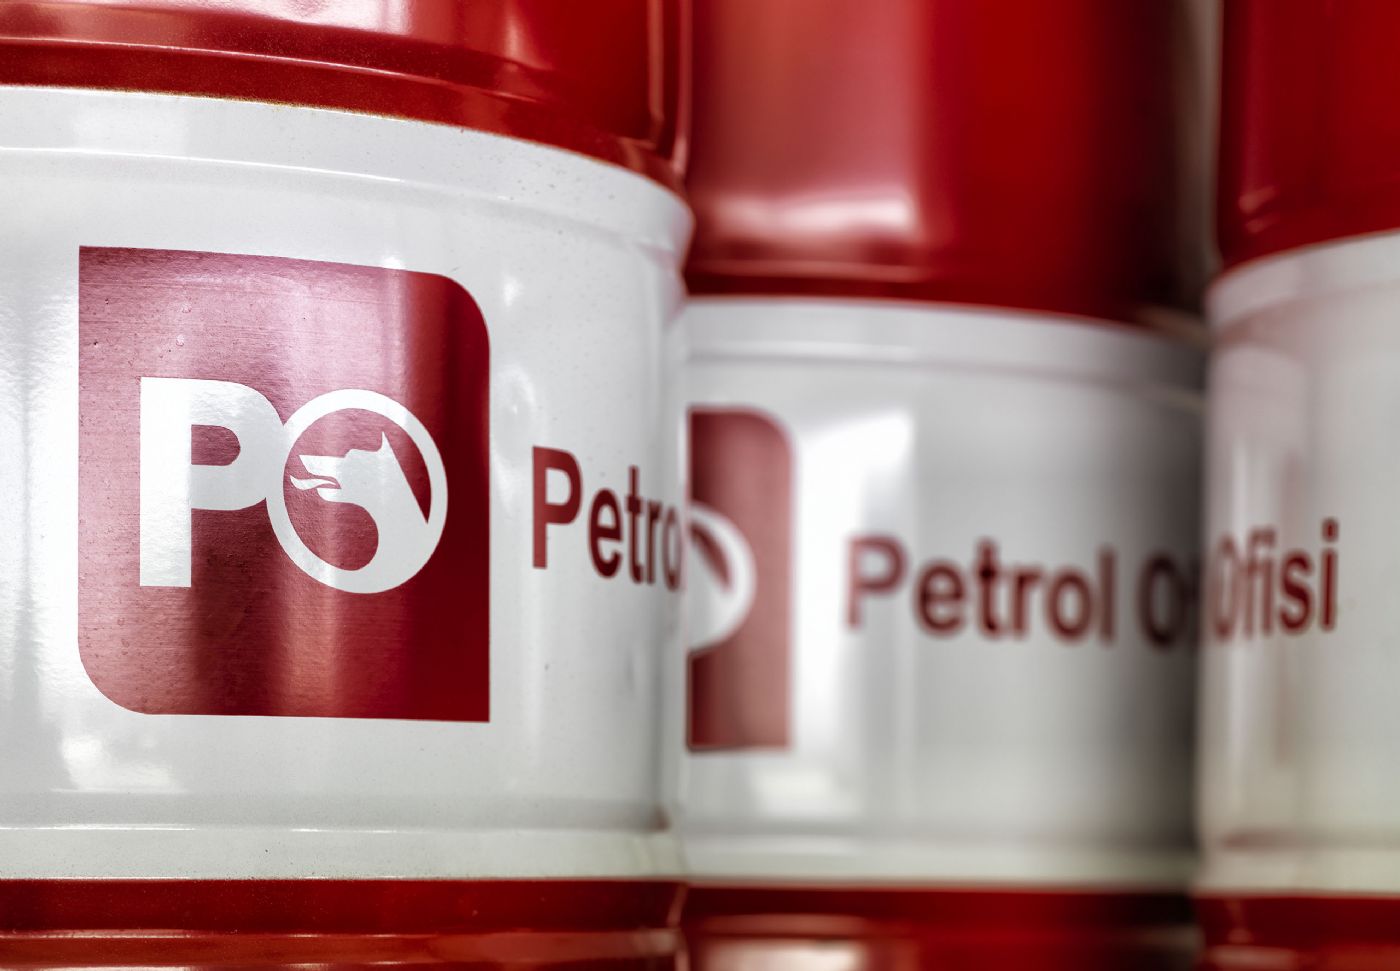 Market leader Petrol Ofisi continues to develop with new directorates